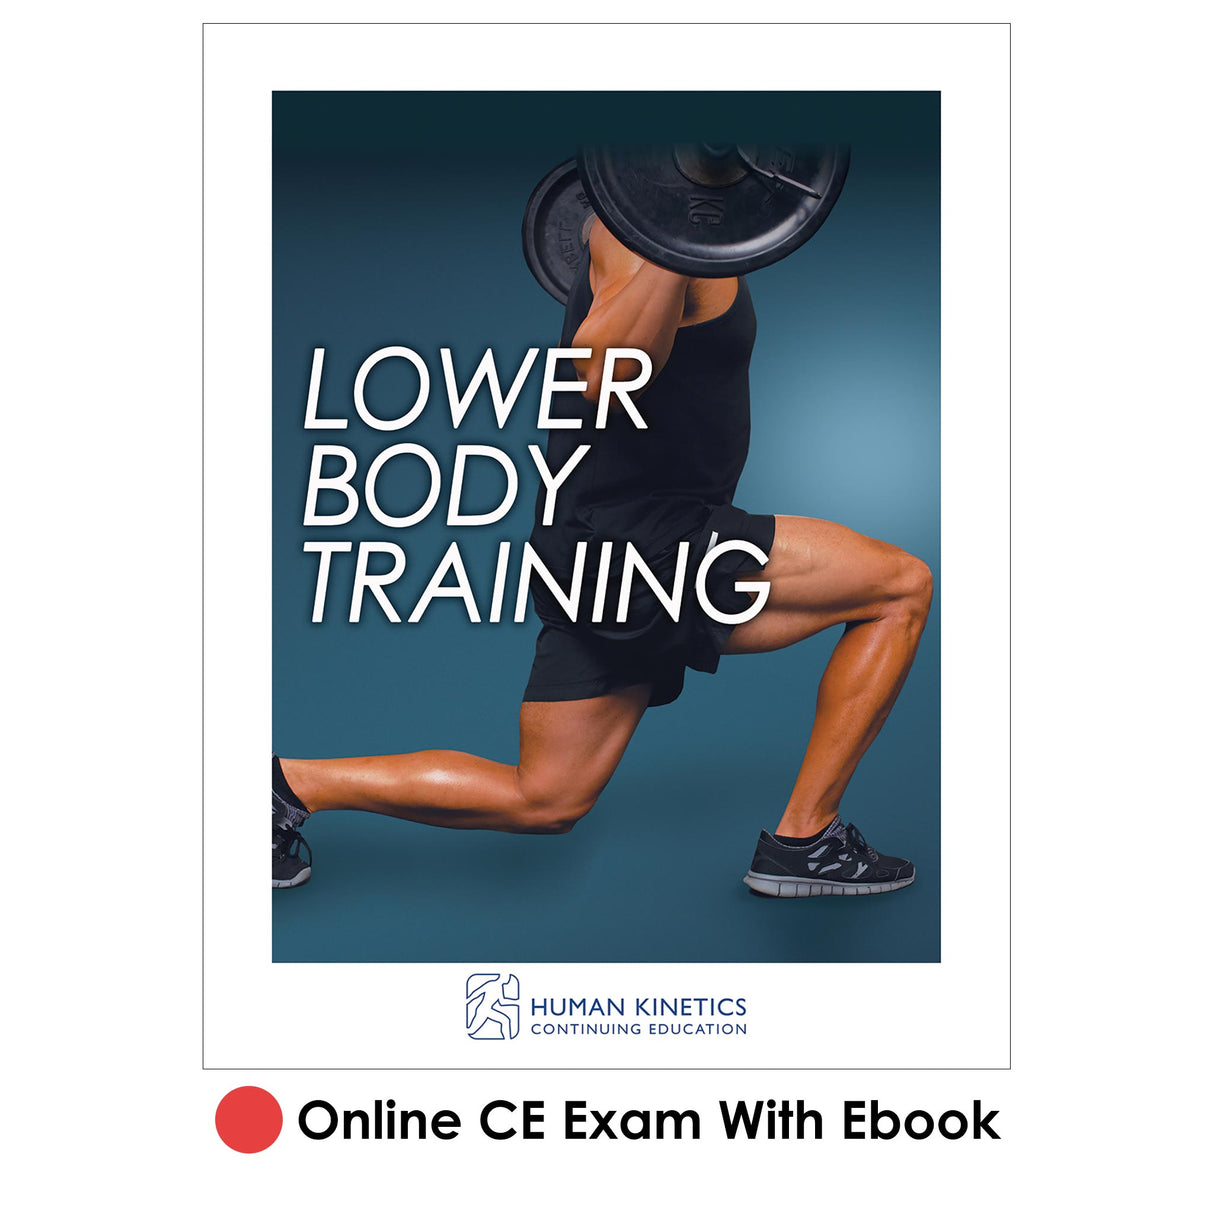 Lower Body Training Online CE Exam With Ebook